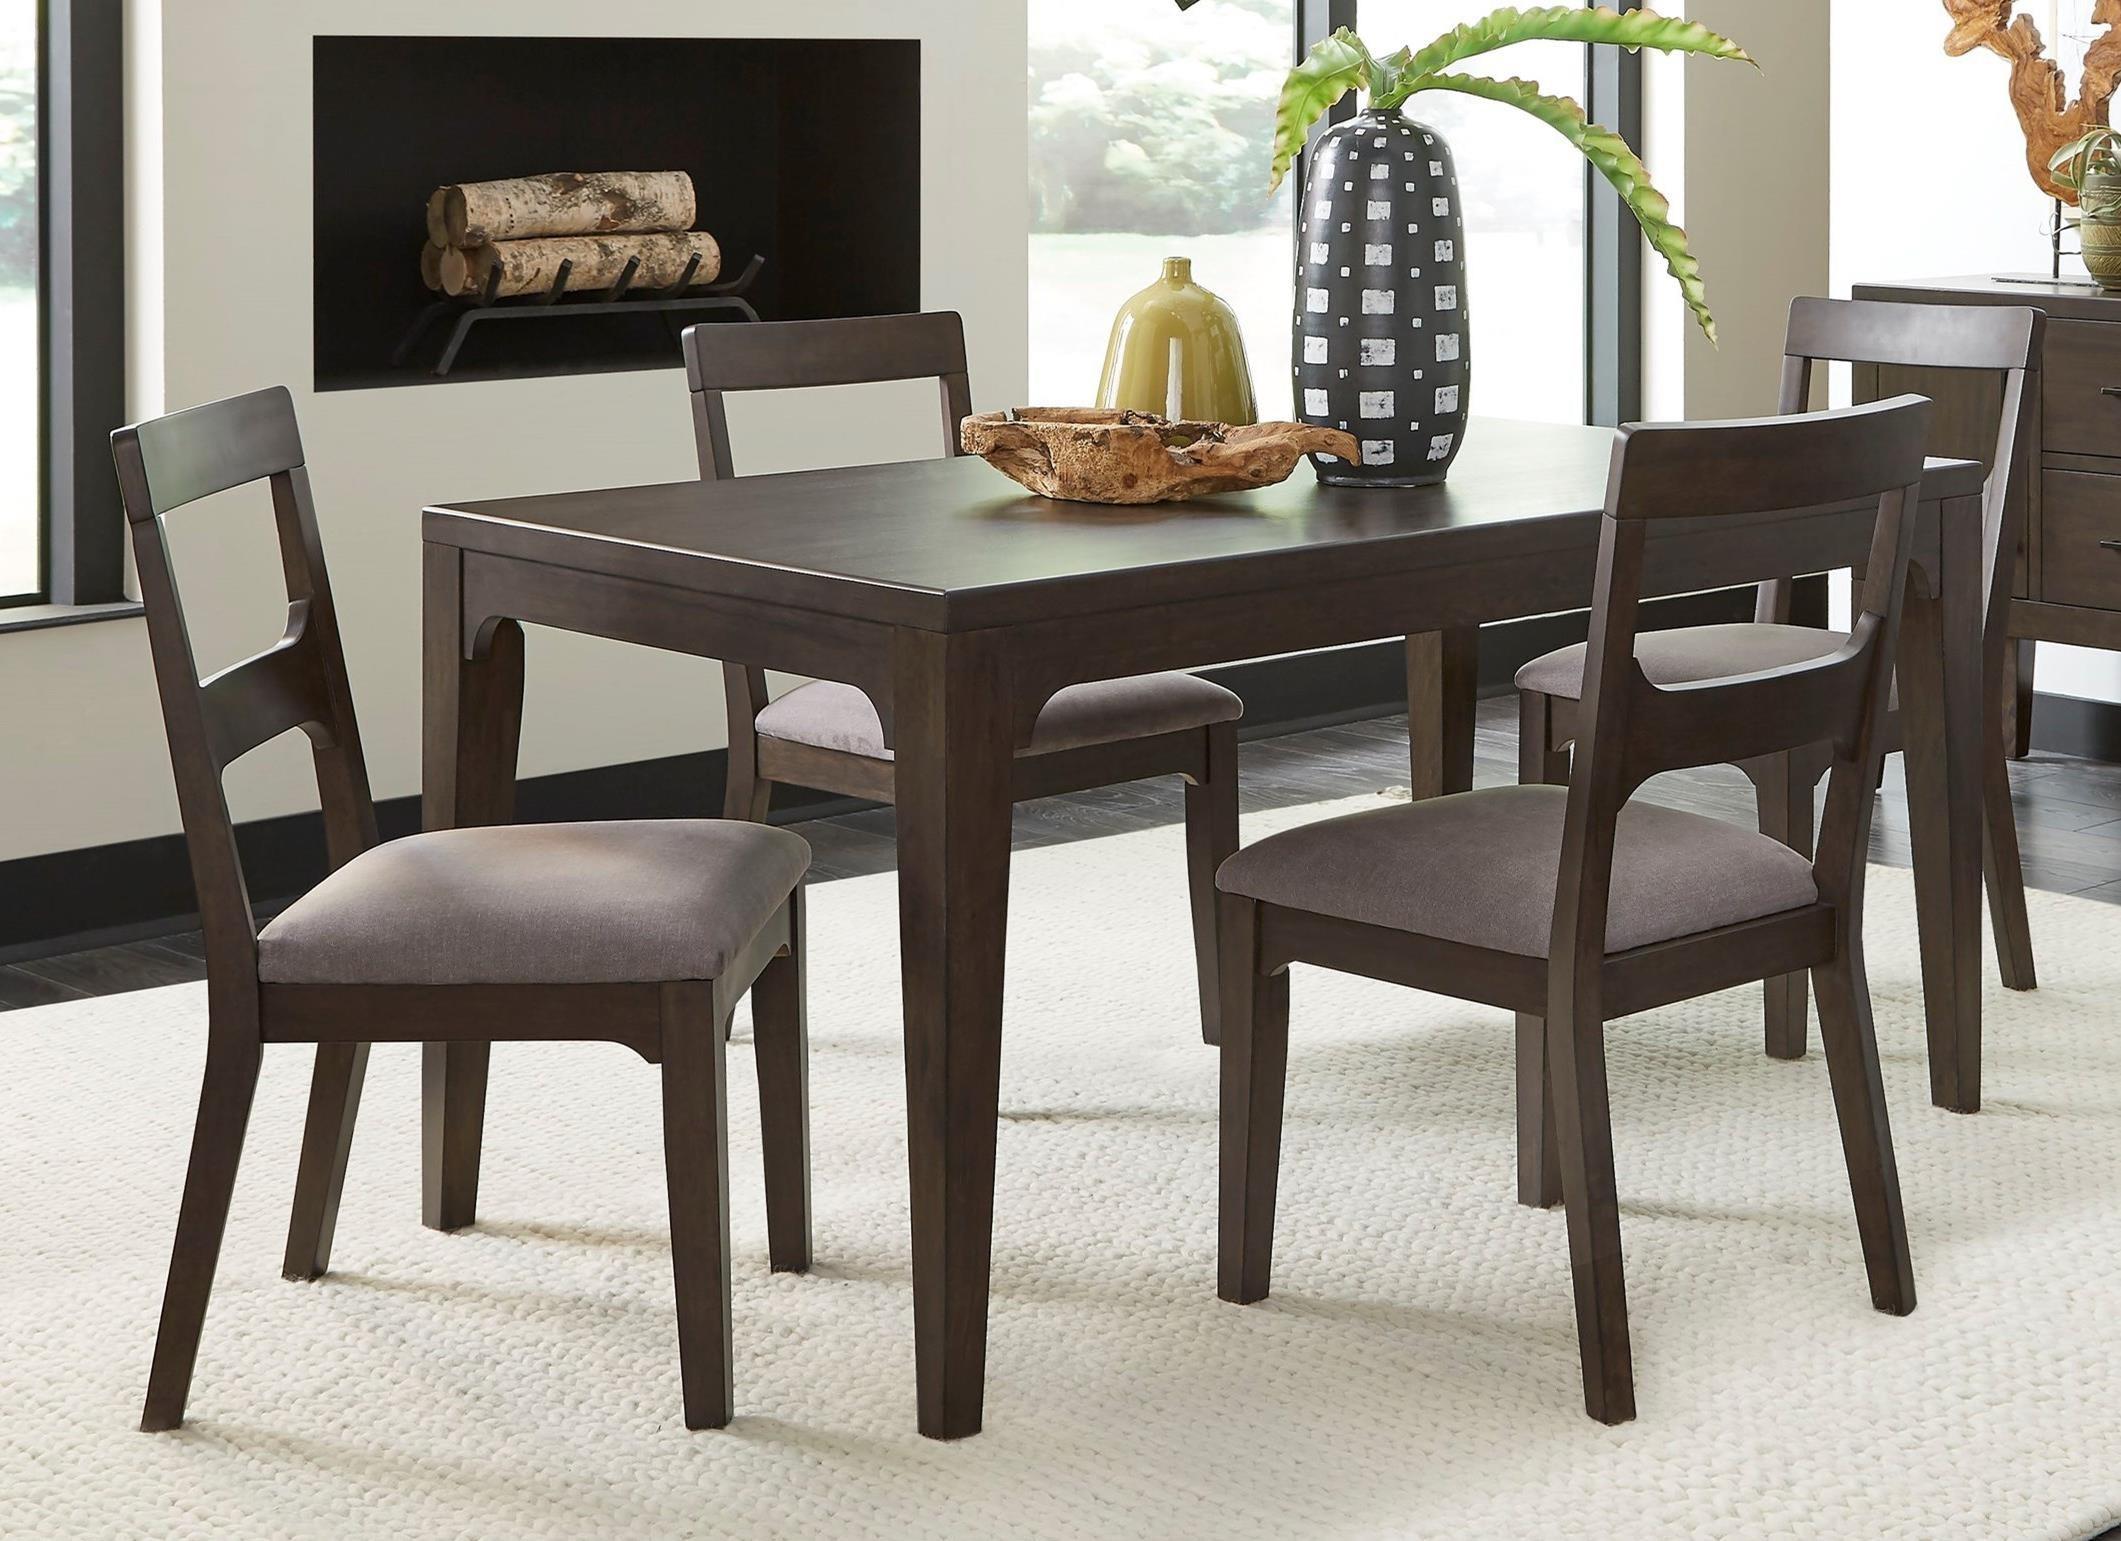 

    
Brown Horse Finish Mid-century Style Dining Room Set 6Pcs BRYCE by Modus Furniture
